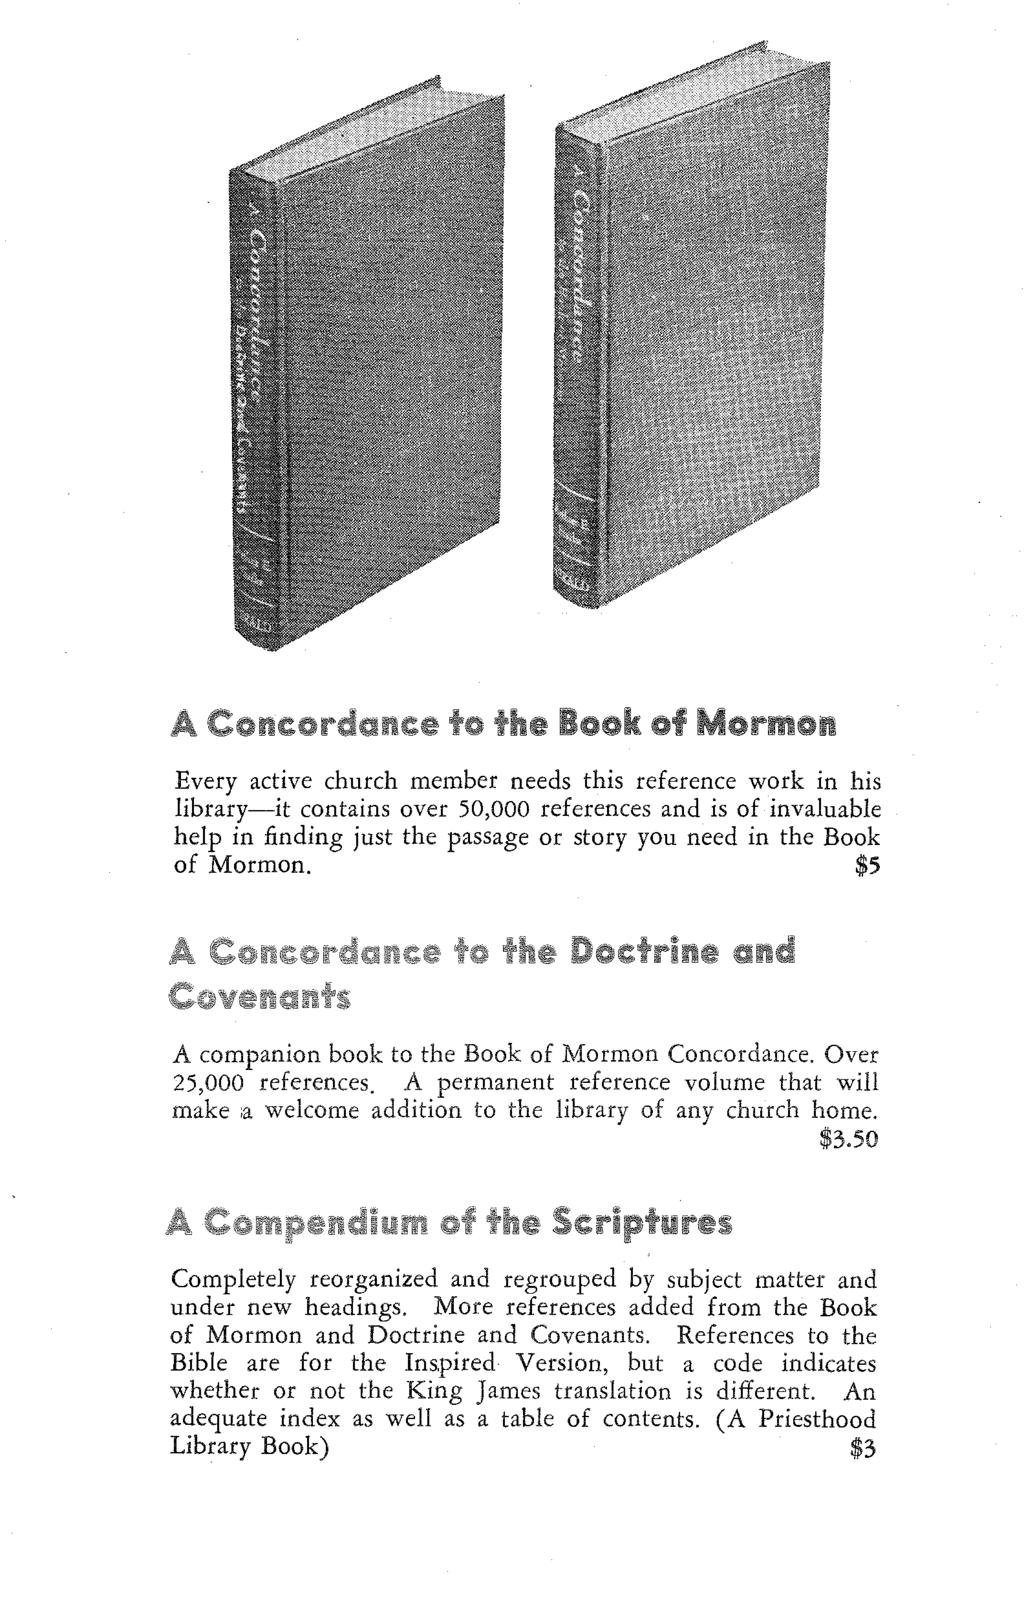 Every active church member needs this reference work in his library-it contains over 50,000 references and is of invaluable help in finding just the passage or story you need in the Book of Mormon.